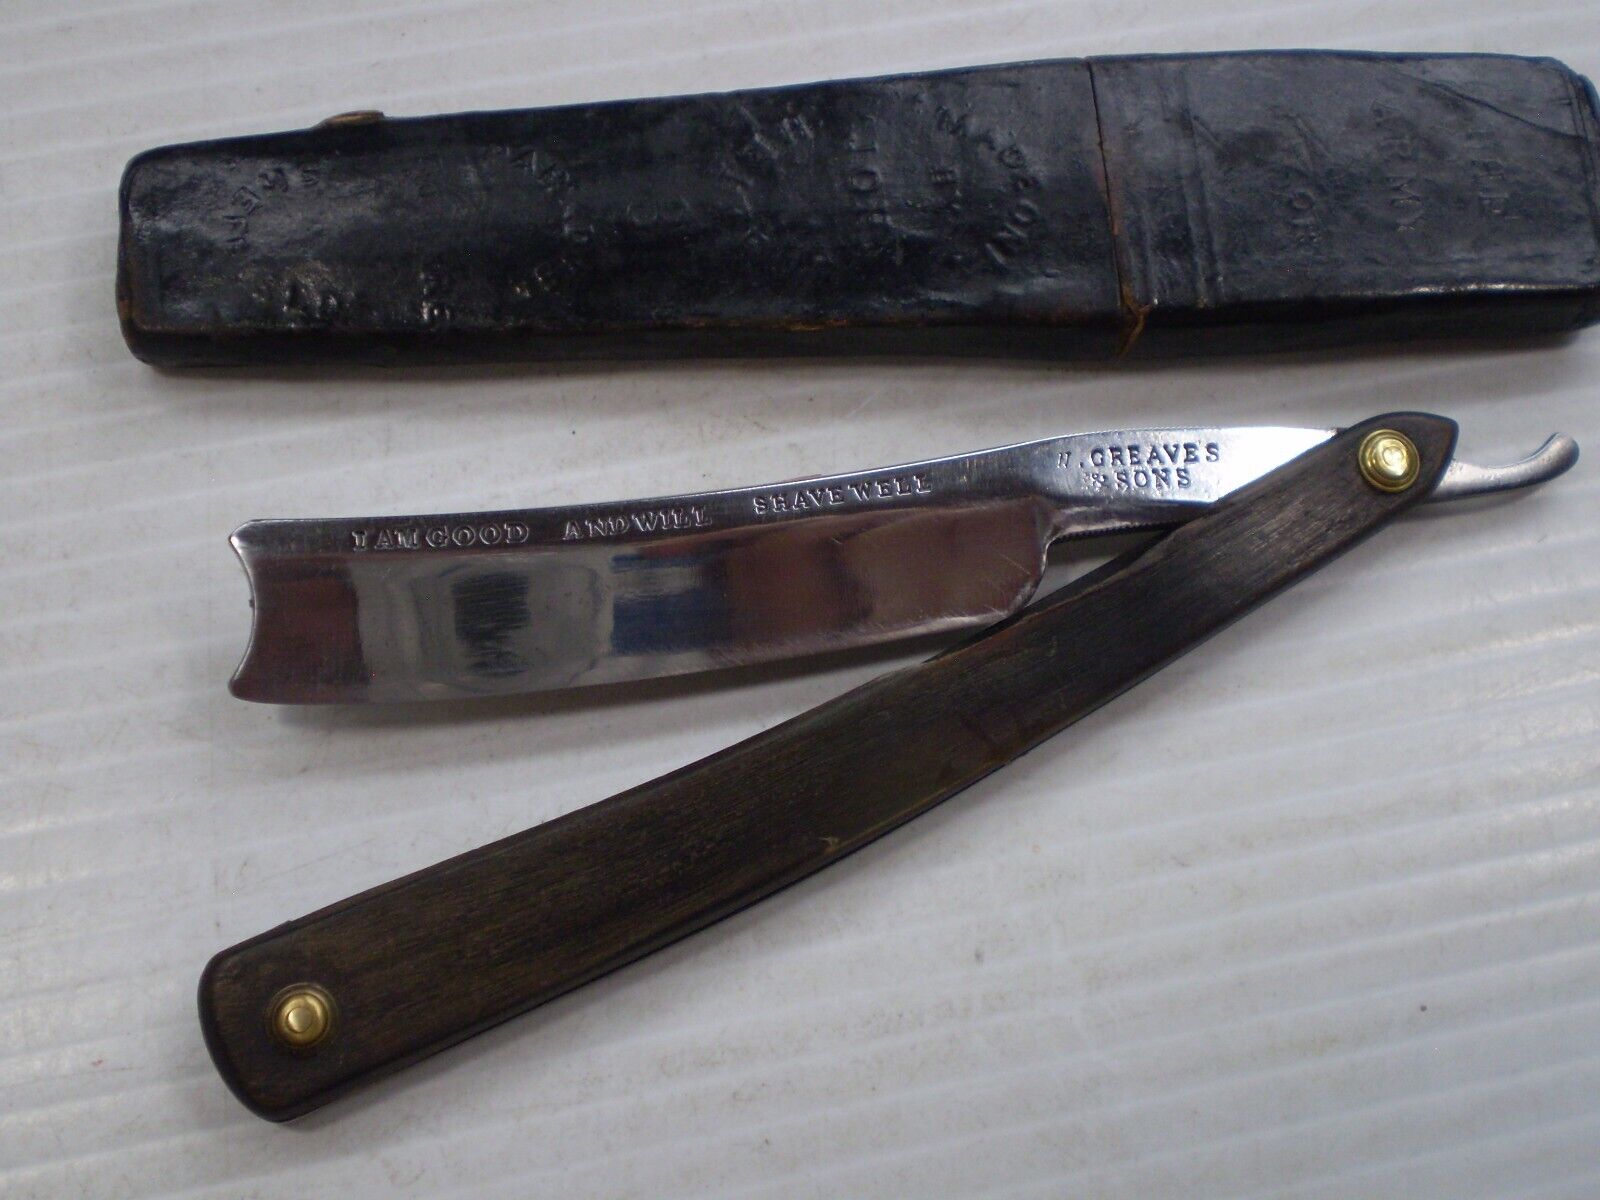 VINTAGE STRAIGHT  RAZOR  W. GREAVES & SONS  11/16 - SHAVE READY